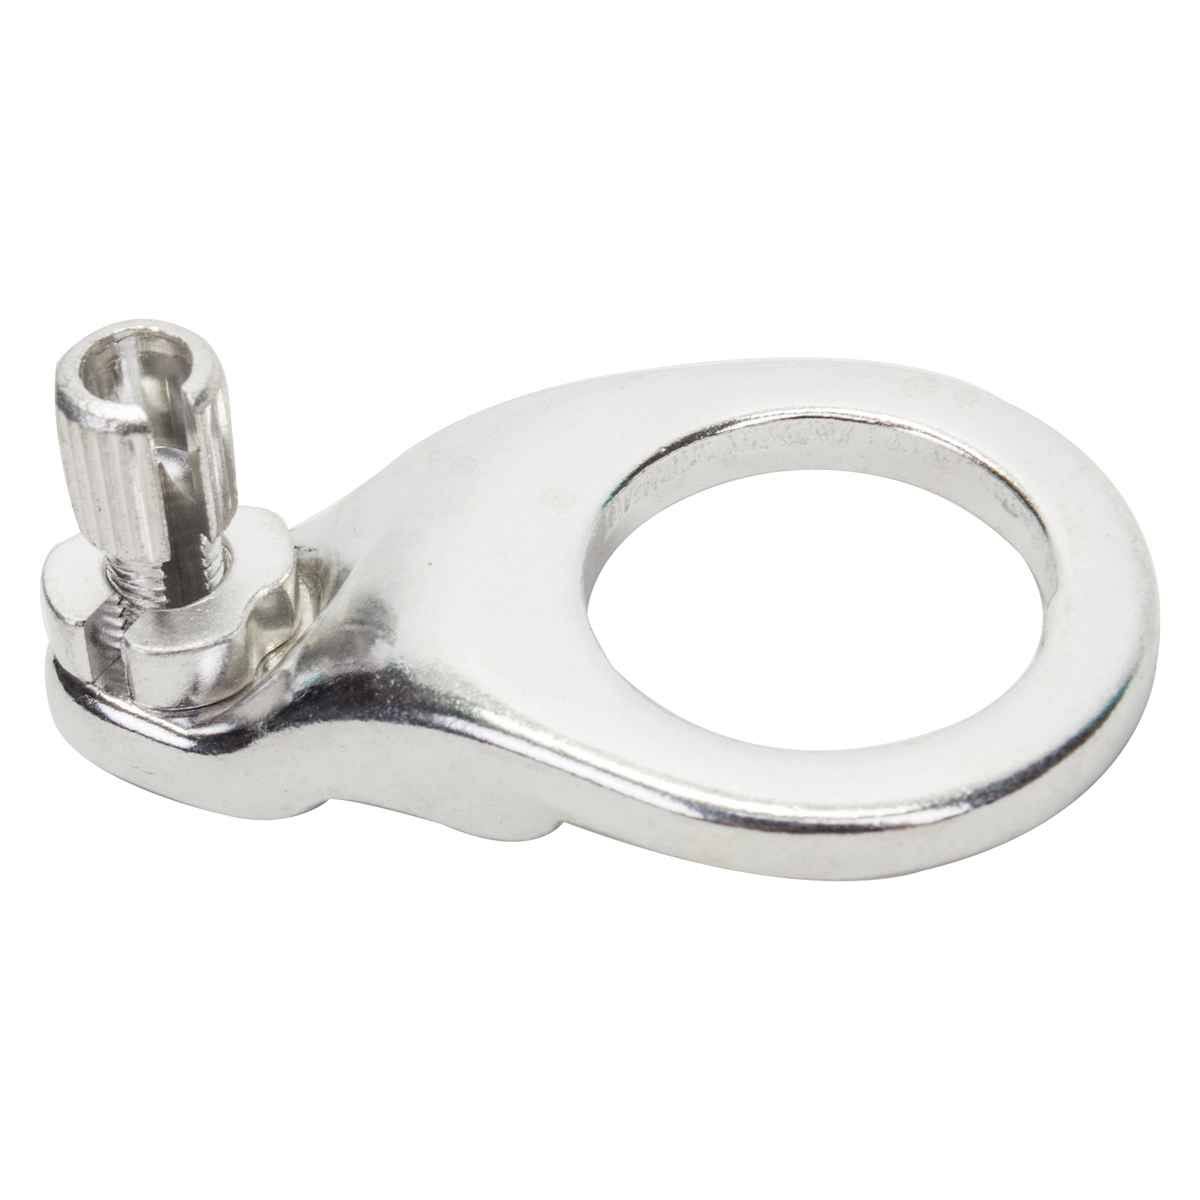 Sunlite Bicycle Brake Part Cable Hanger - Silver, 1"